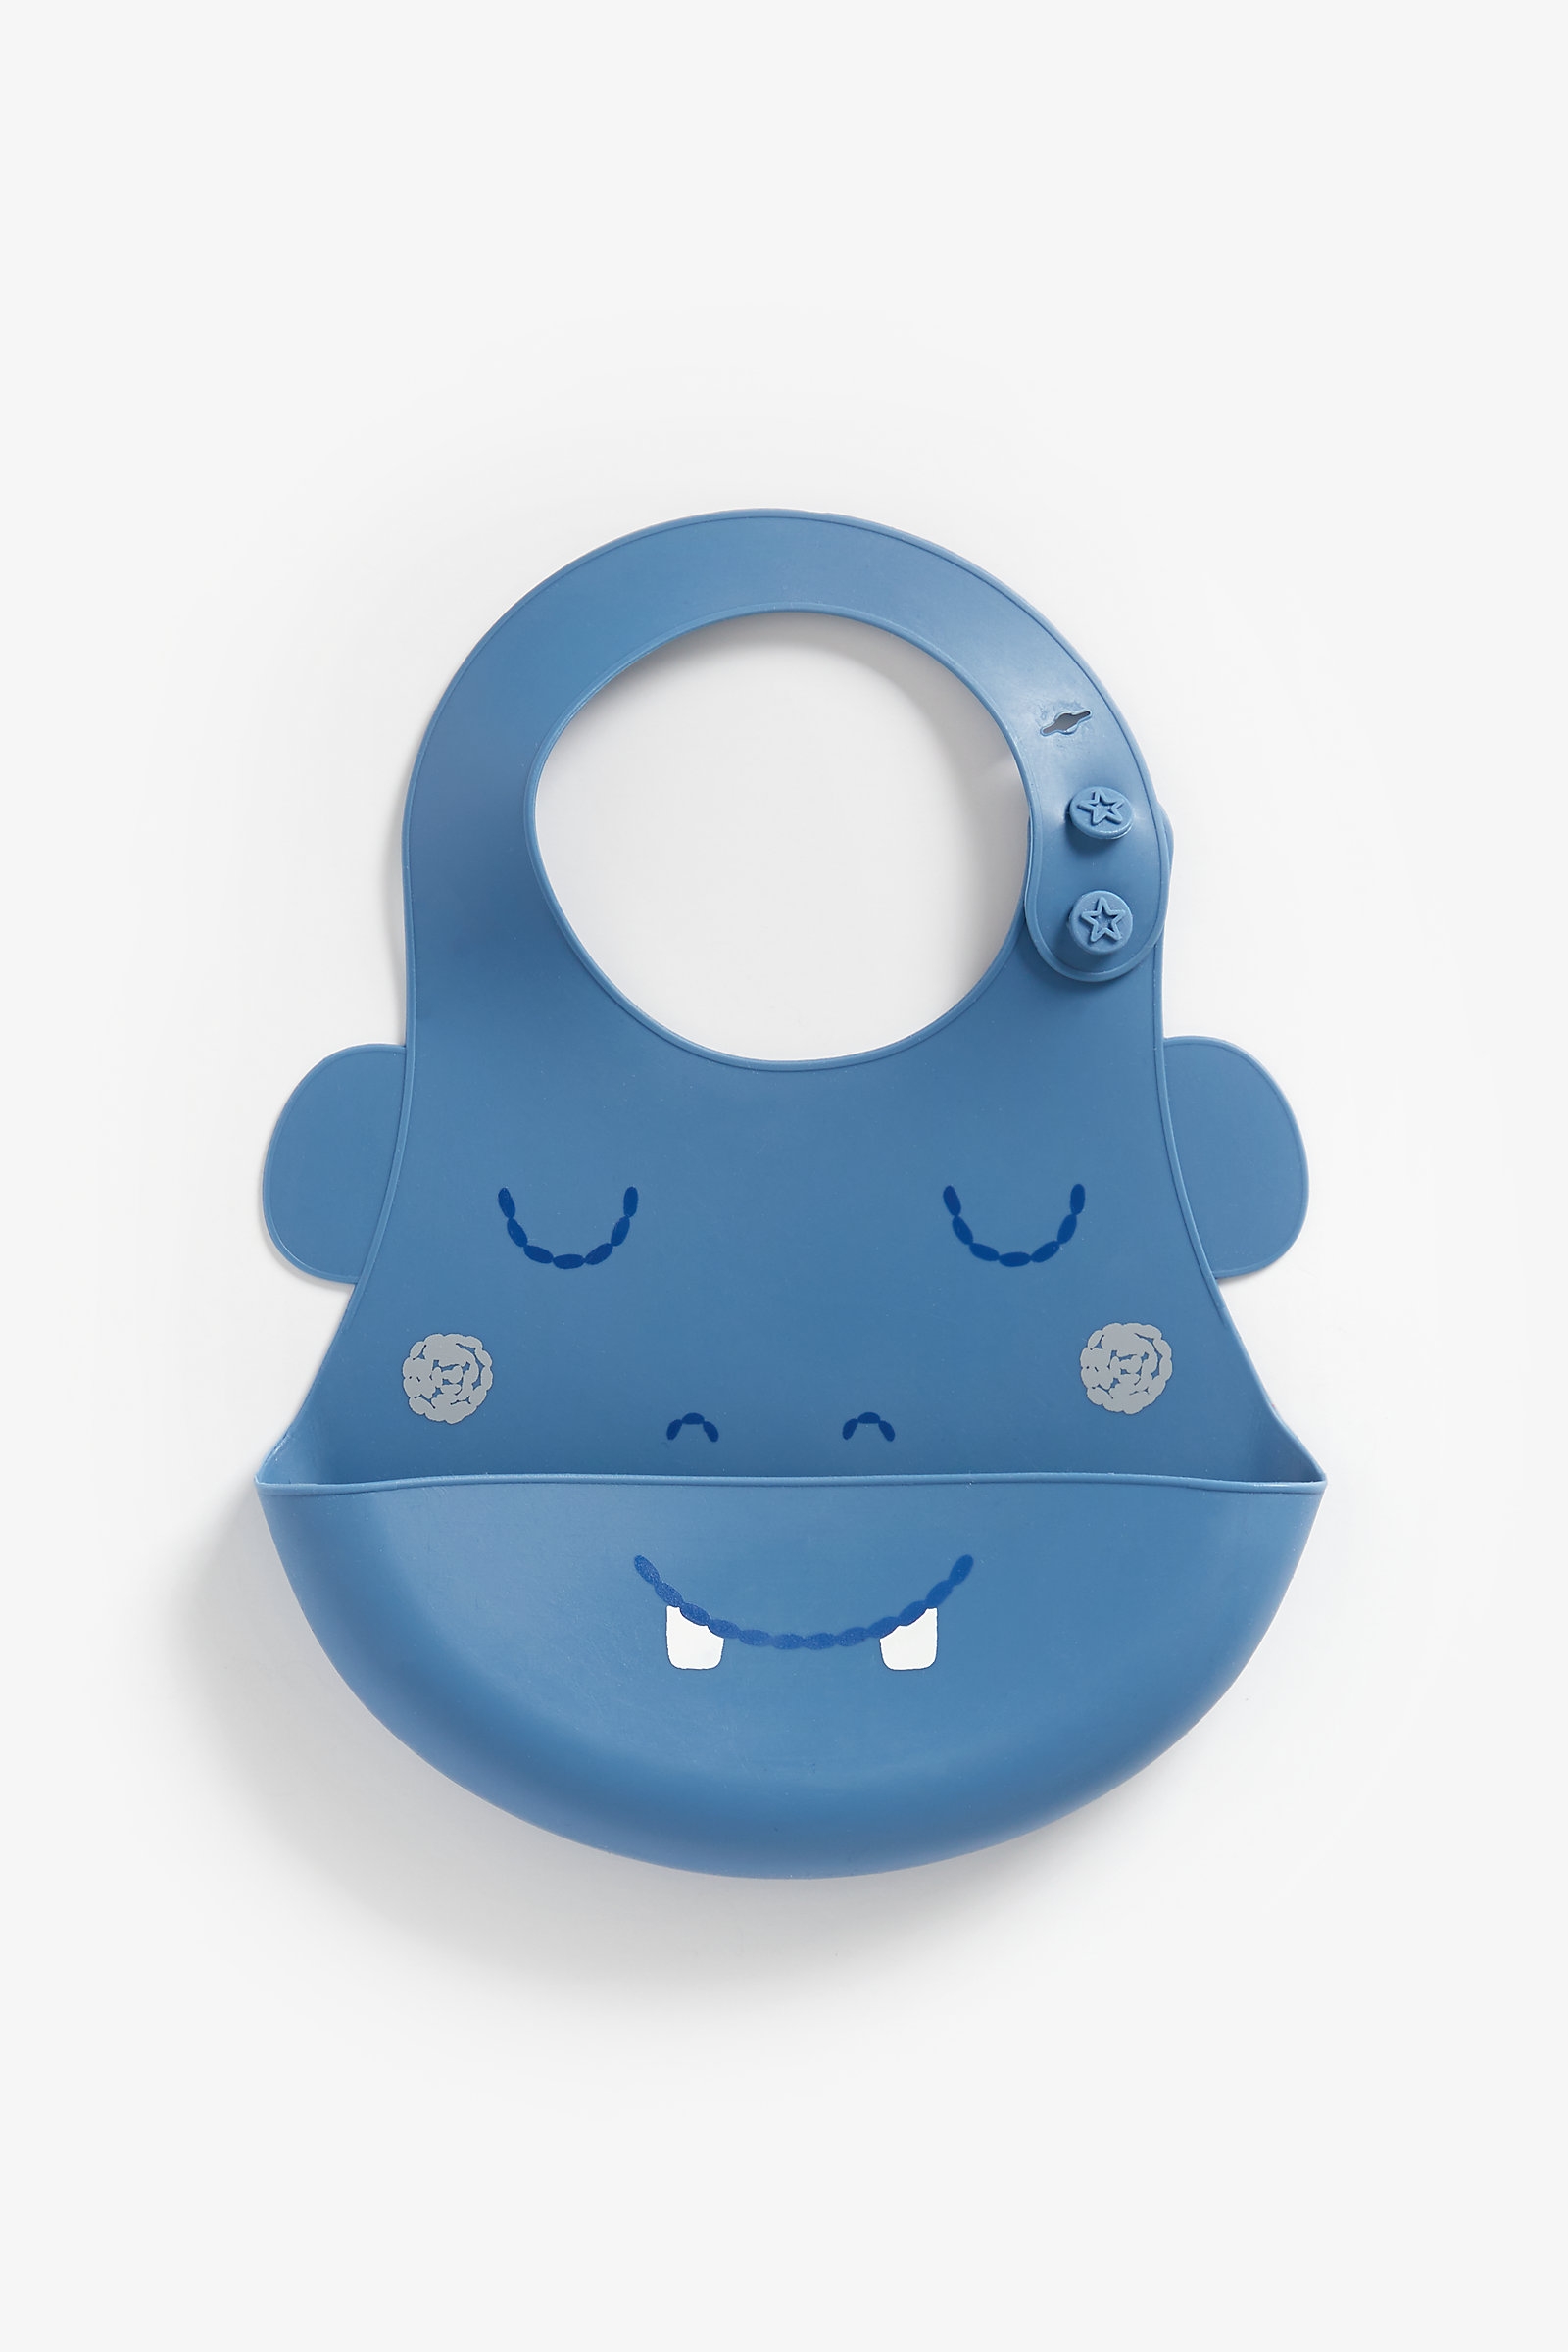 Mothercare | Mothercare Faces Crumb-catcher Blue Pack of 2 2